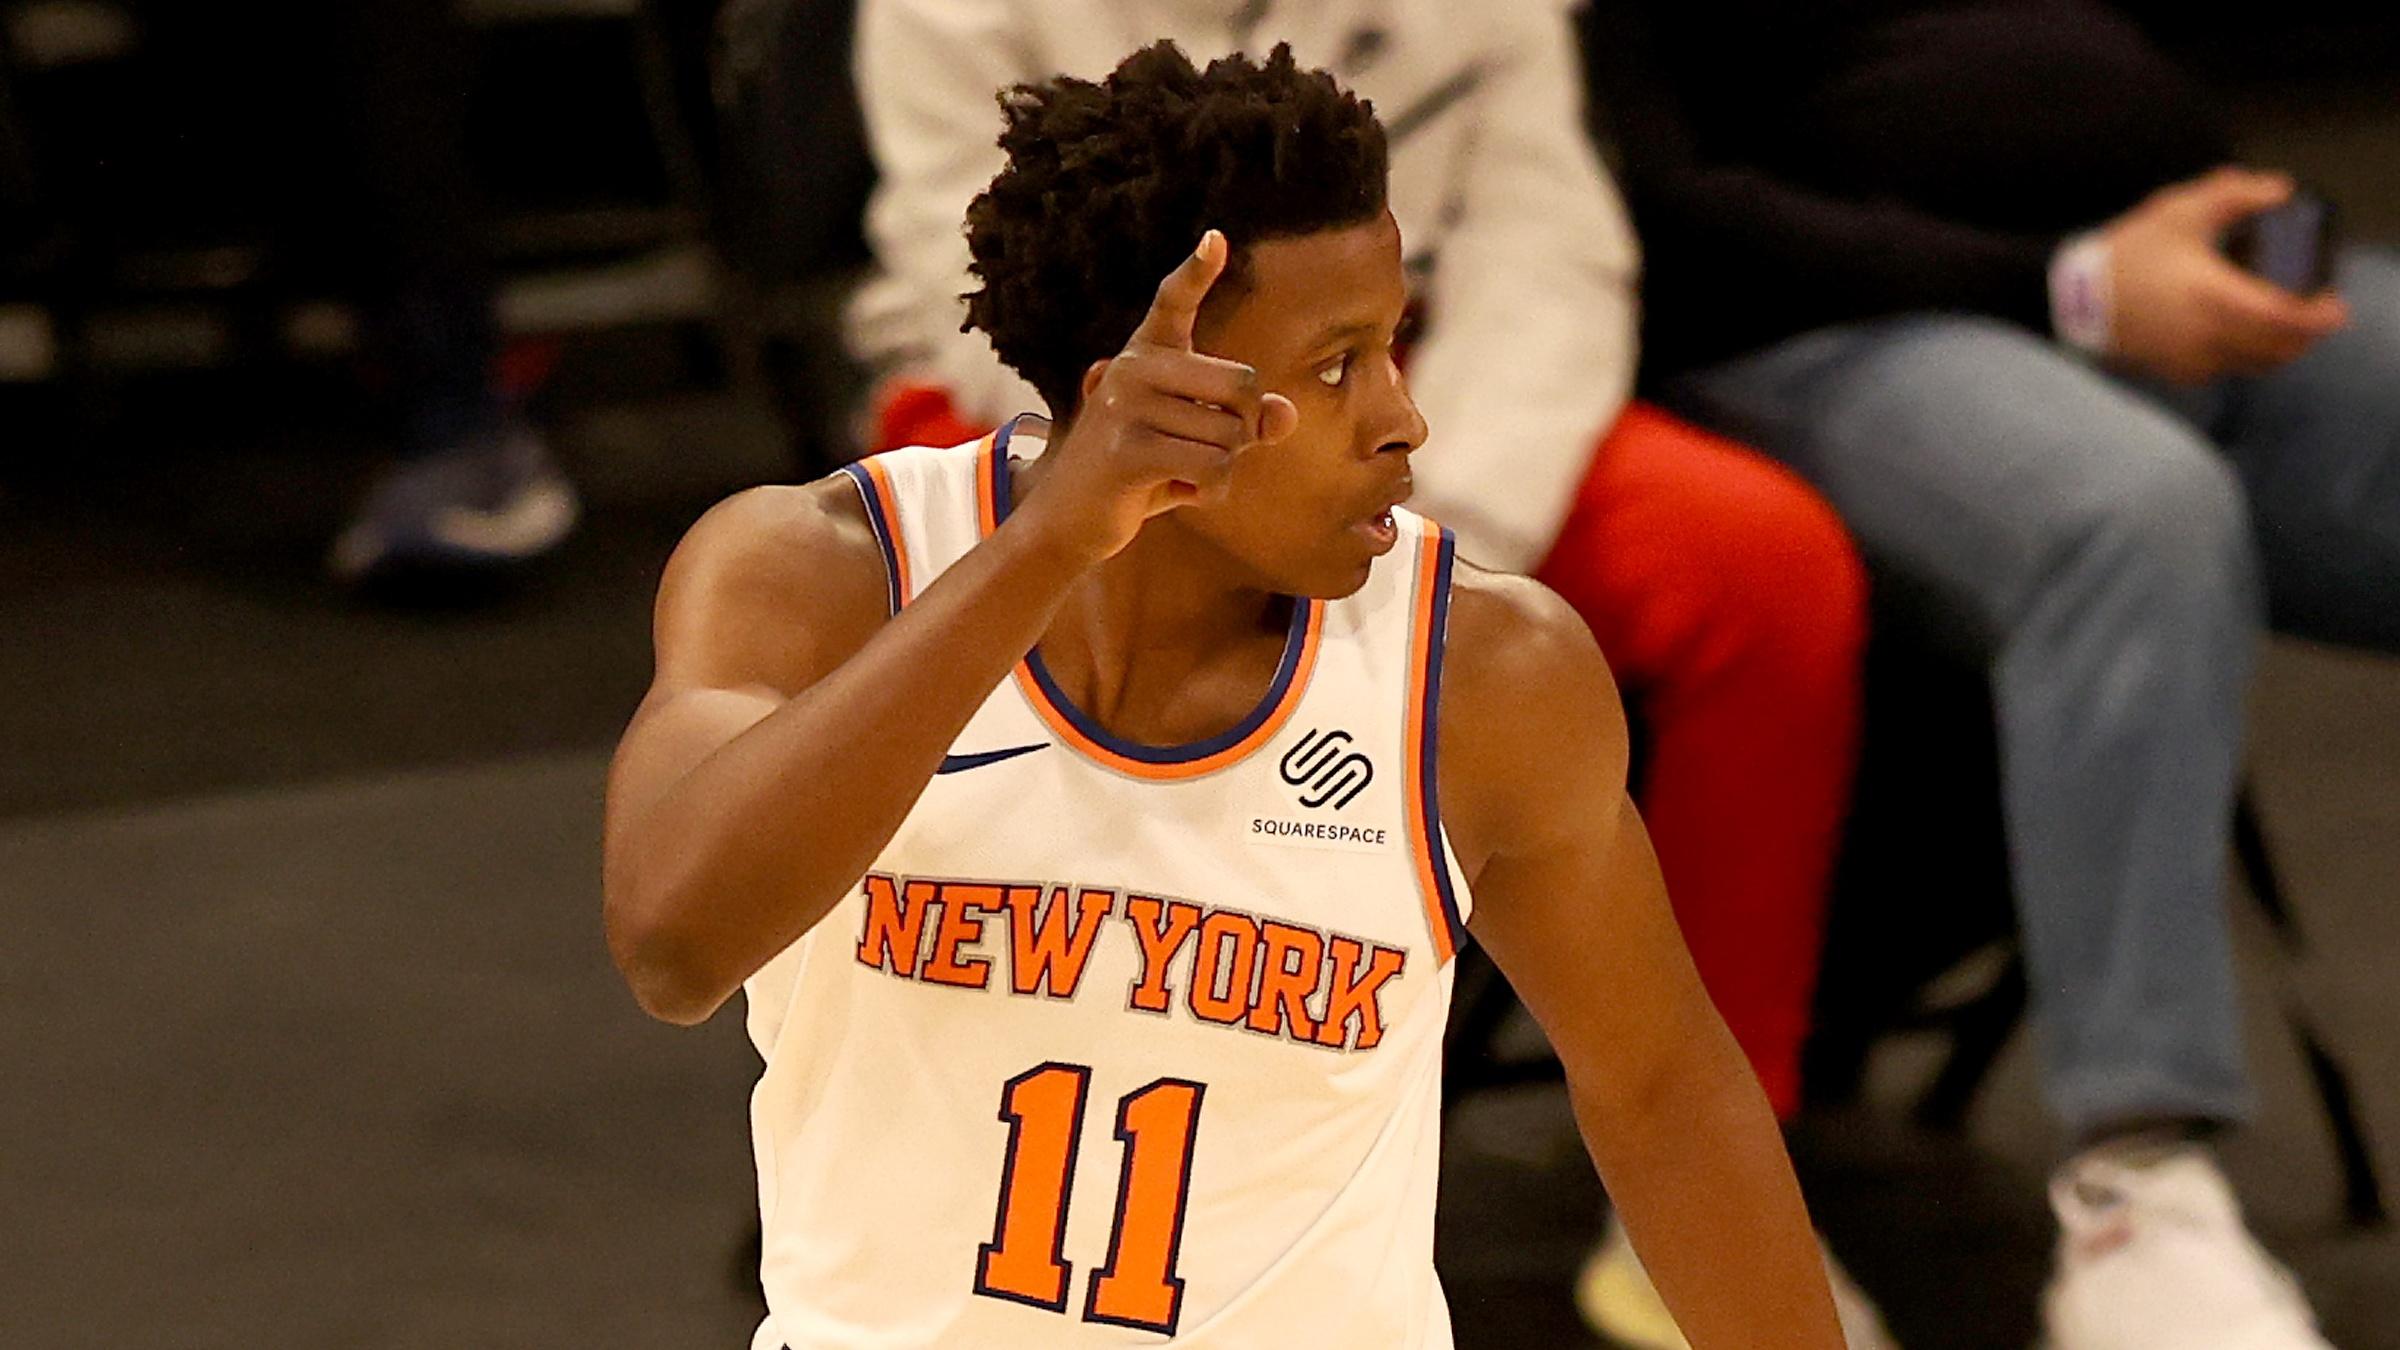 Feb 27, 2021; New York, New York, USA; Frank Ntilikina #11 of the New York Knicks celebrates his three point shot in the second quarter against the Indiana Pacers at Madison Square Garden. Mandatory Credit: POOL PHOTOS-USA TODAY Sports / © POOL PHOTOS-USA TODAY Sports